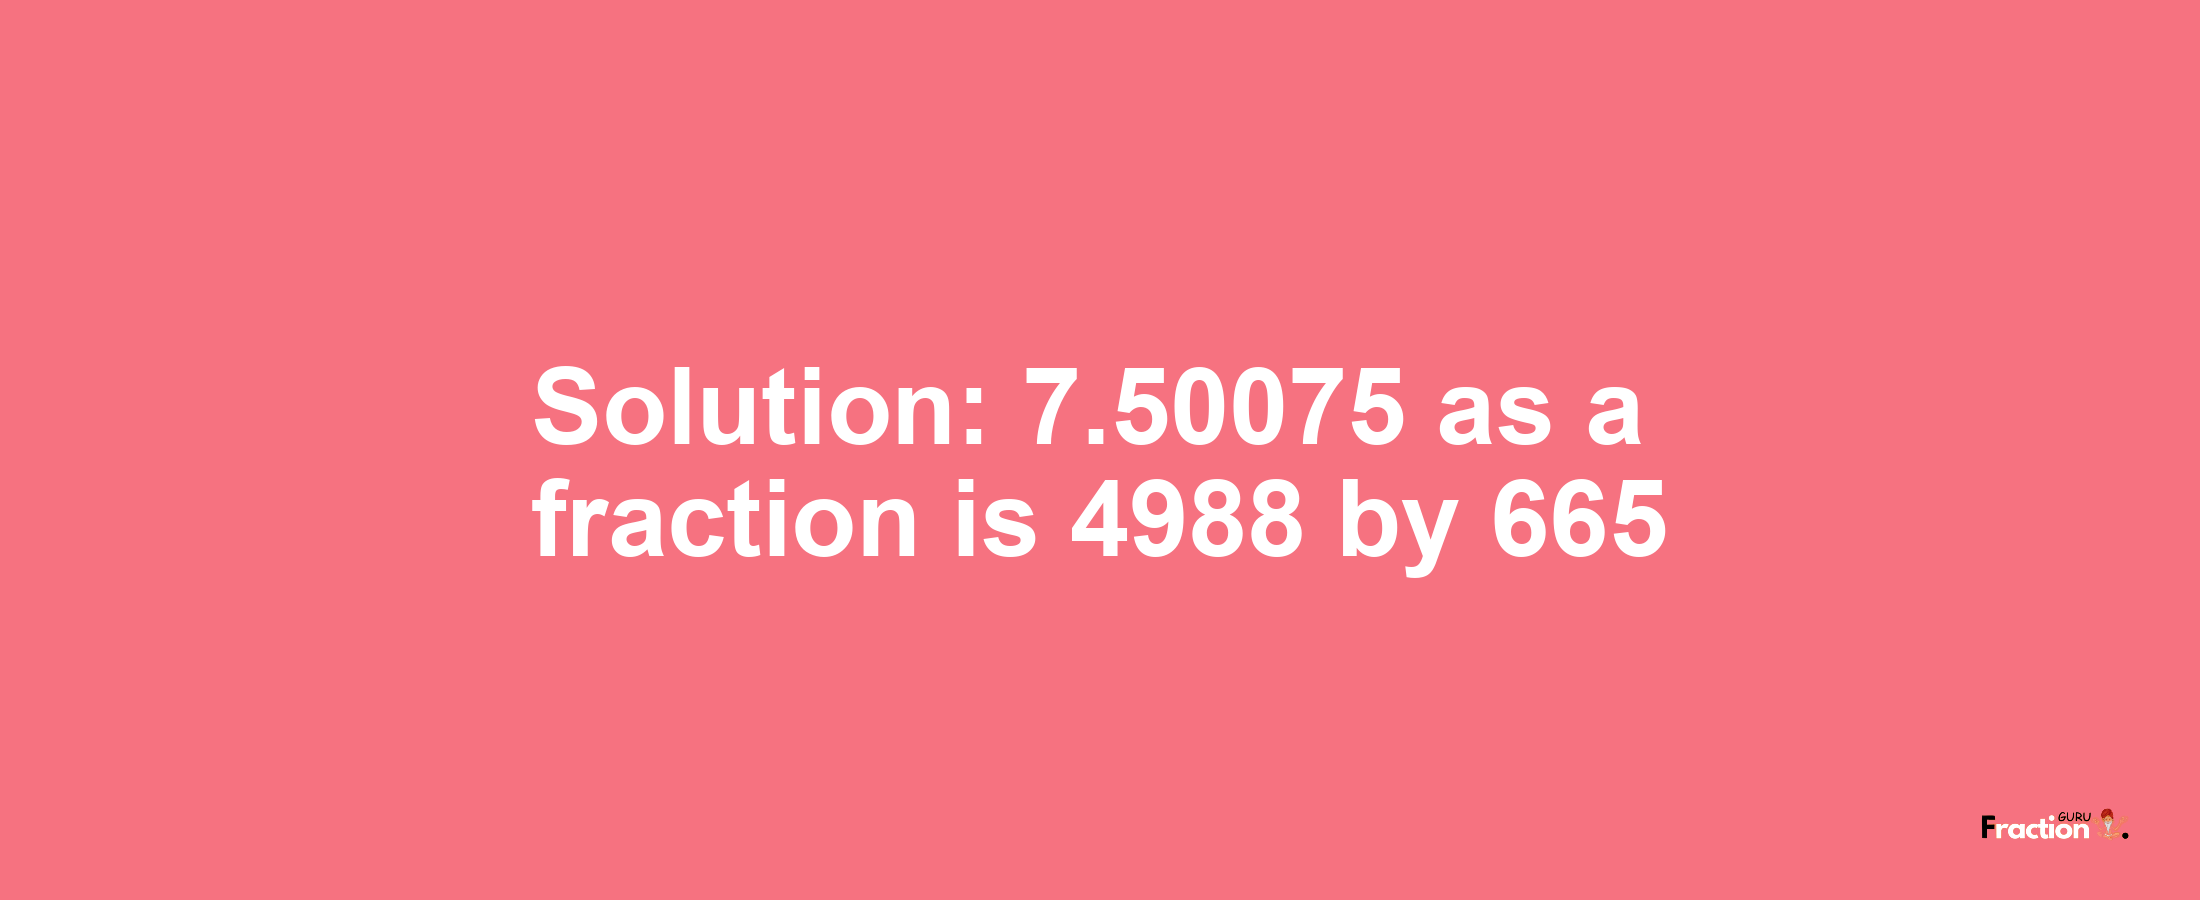 Solution:7.50075 as a fraction is 4988/665